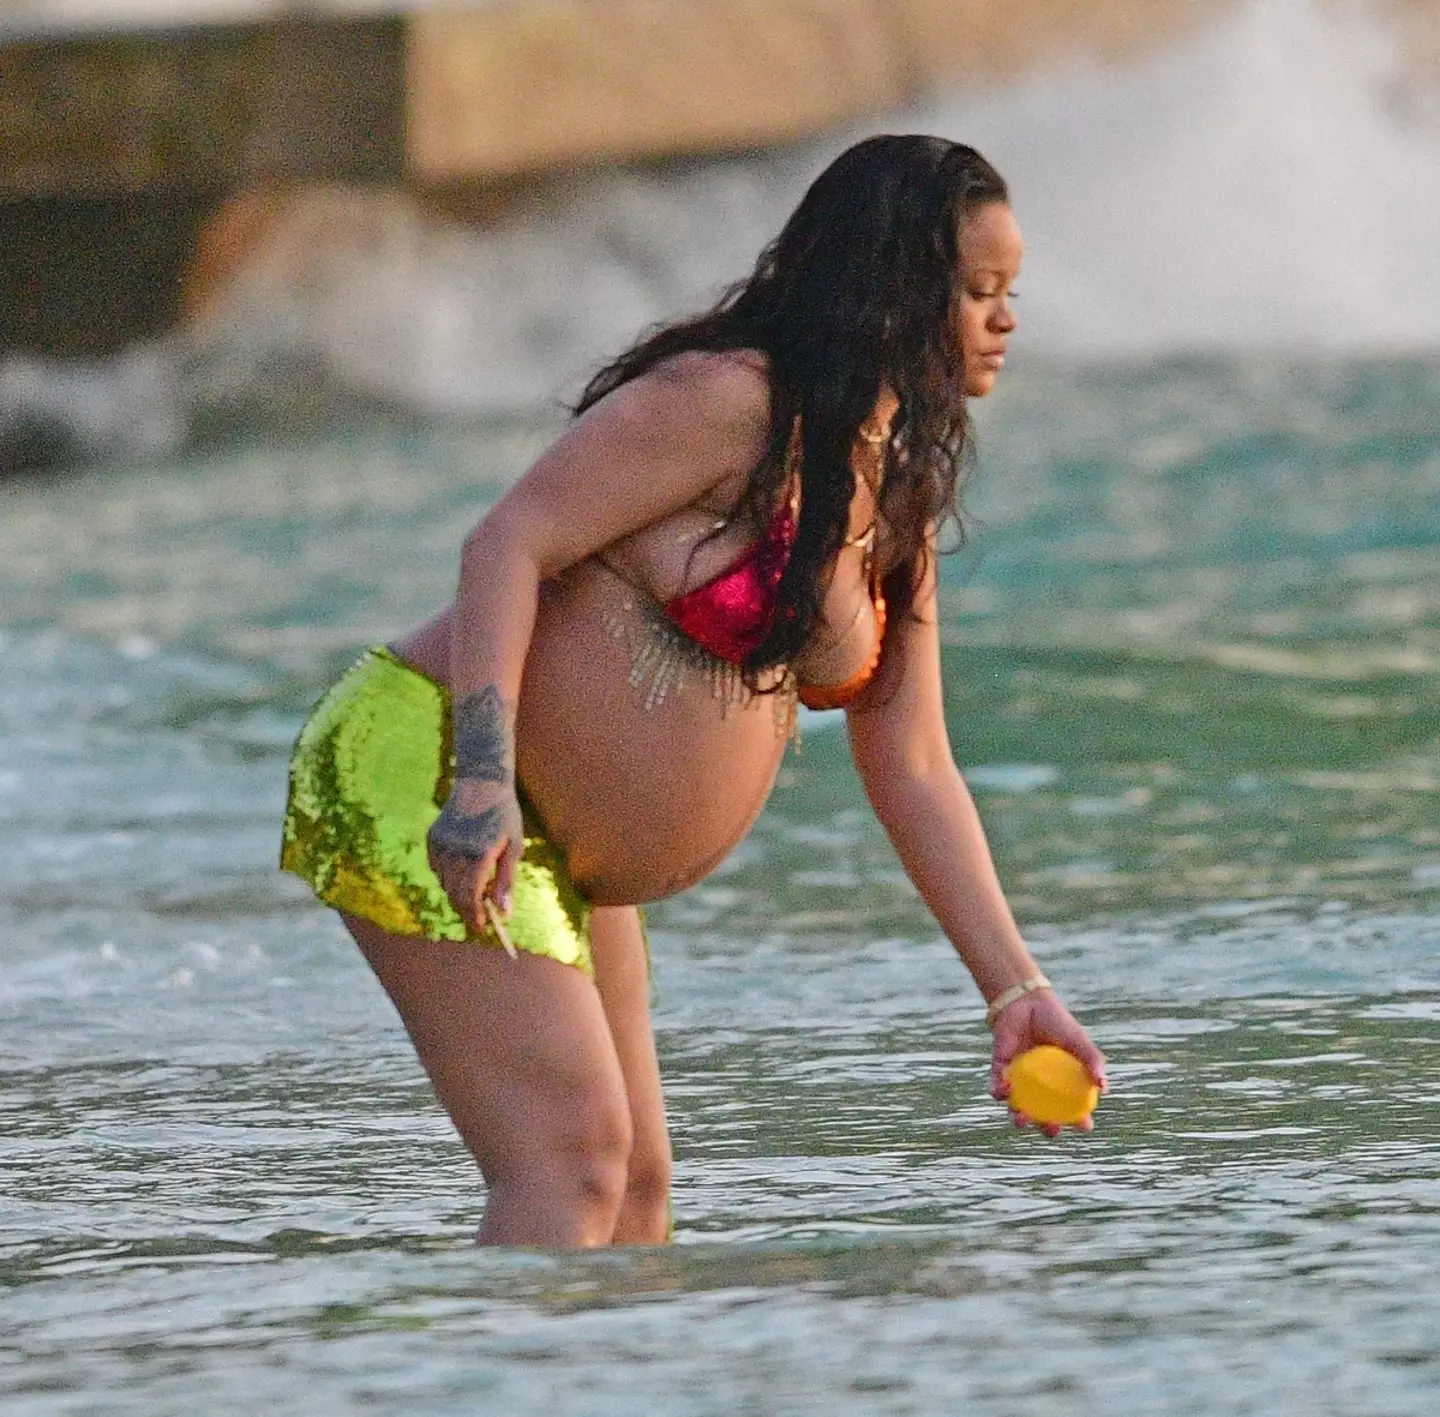 Here's Rihanna dipping a mango in the ocean, triggering a viral food trend online.